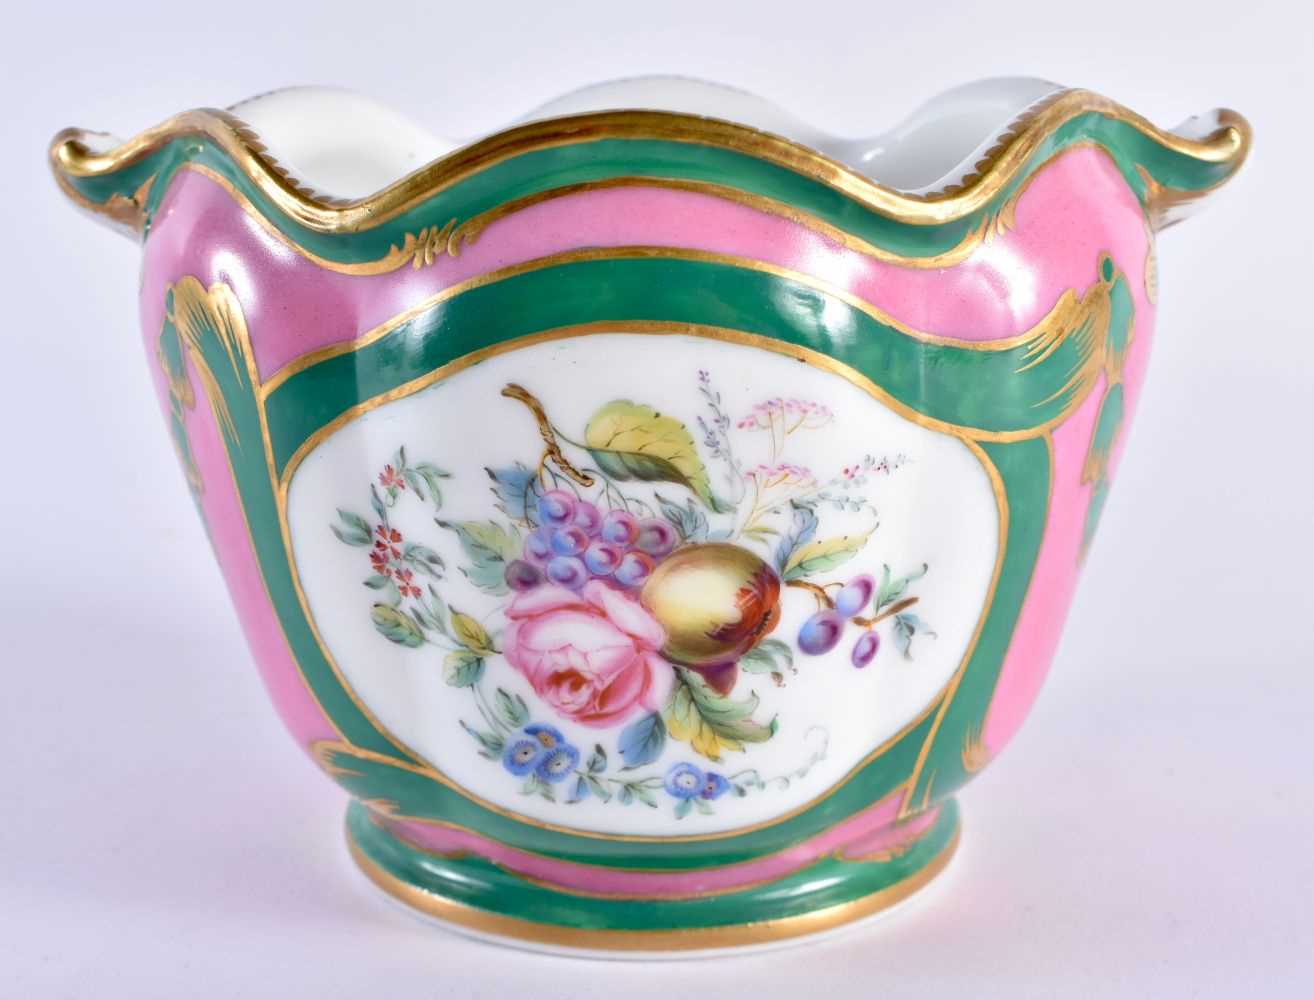 19th century Sevres style bottle cooler painted with birds with flowers verso, the ground in pink - Image 3 of 5